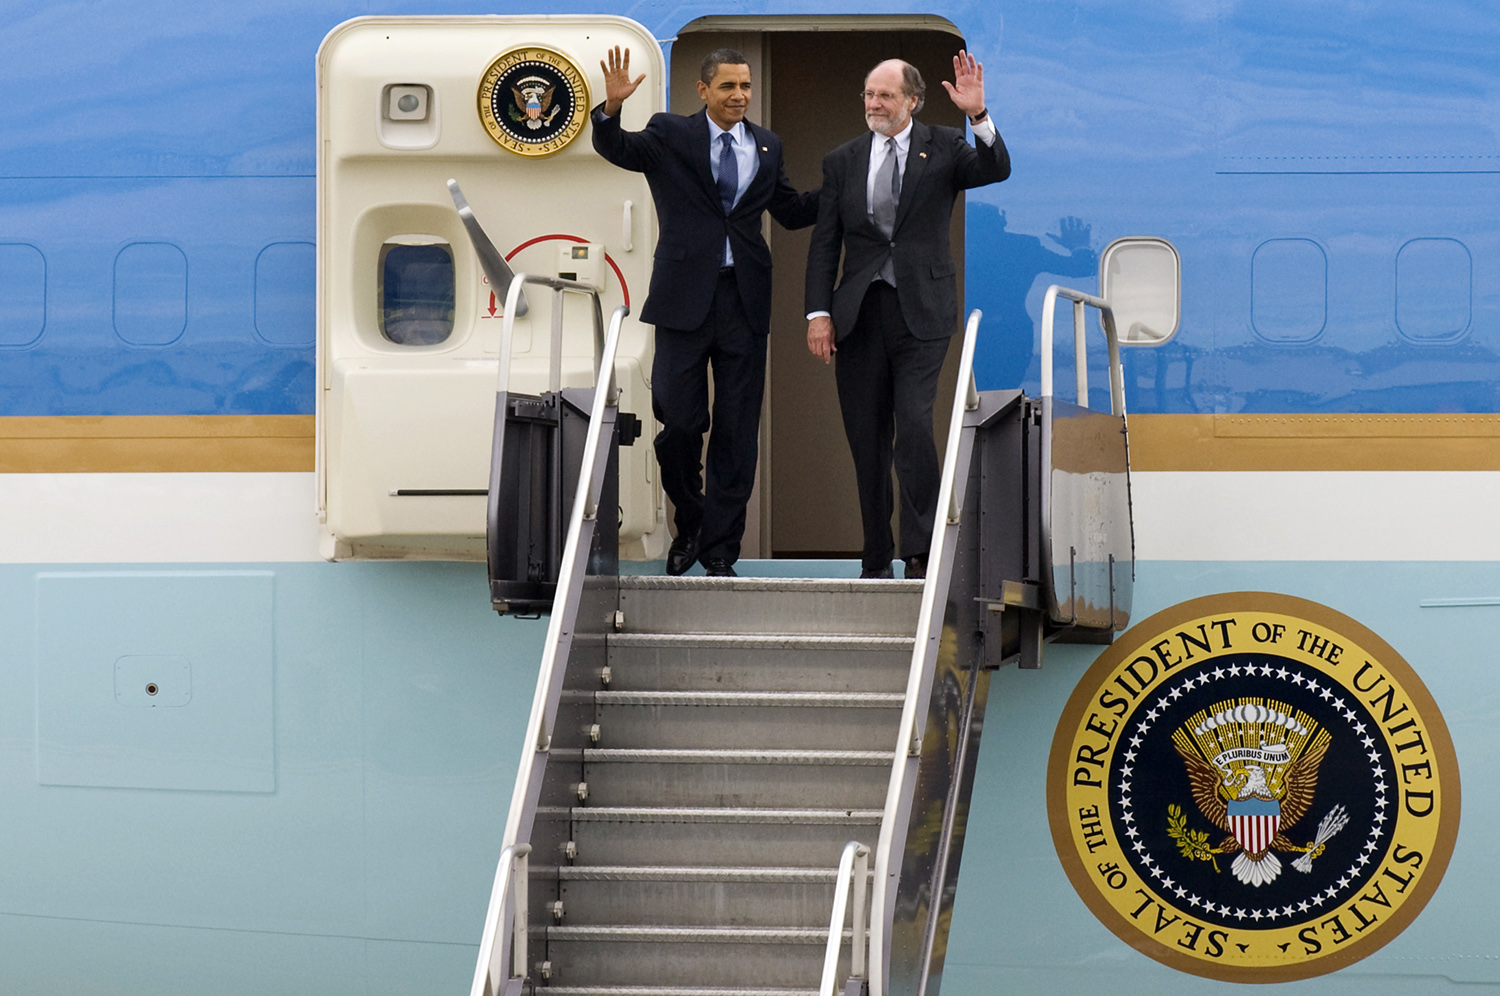 U.S. President Barack Obama and New Jersey Gov. Jon Corzine wave at the top of the steps as they exit Air Force One at Newark Liberty International Airport. (Reena Rose Sibayan | Associated Press)